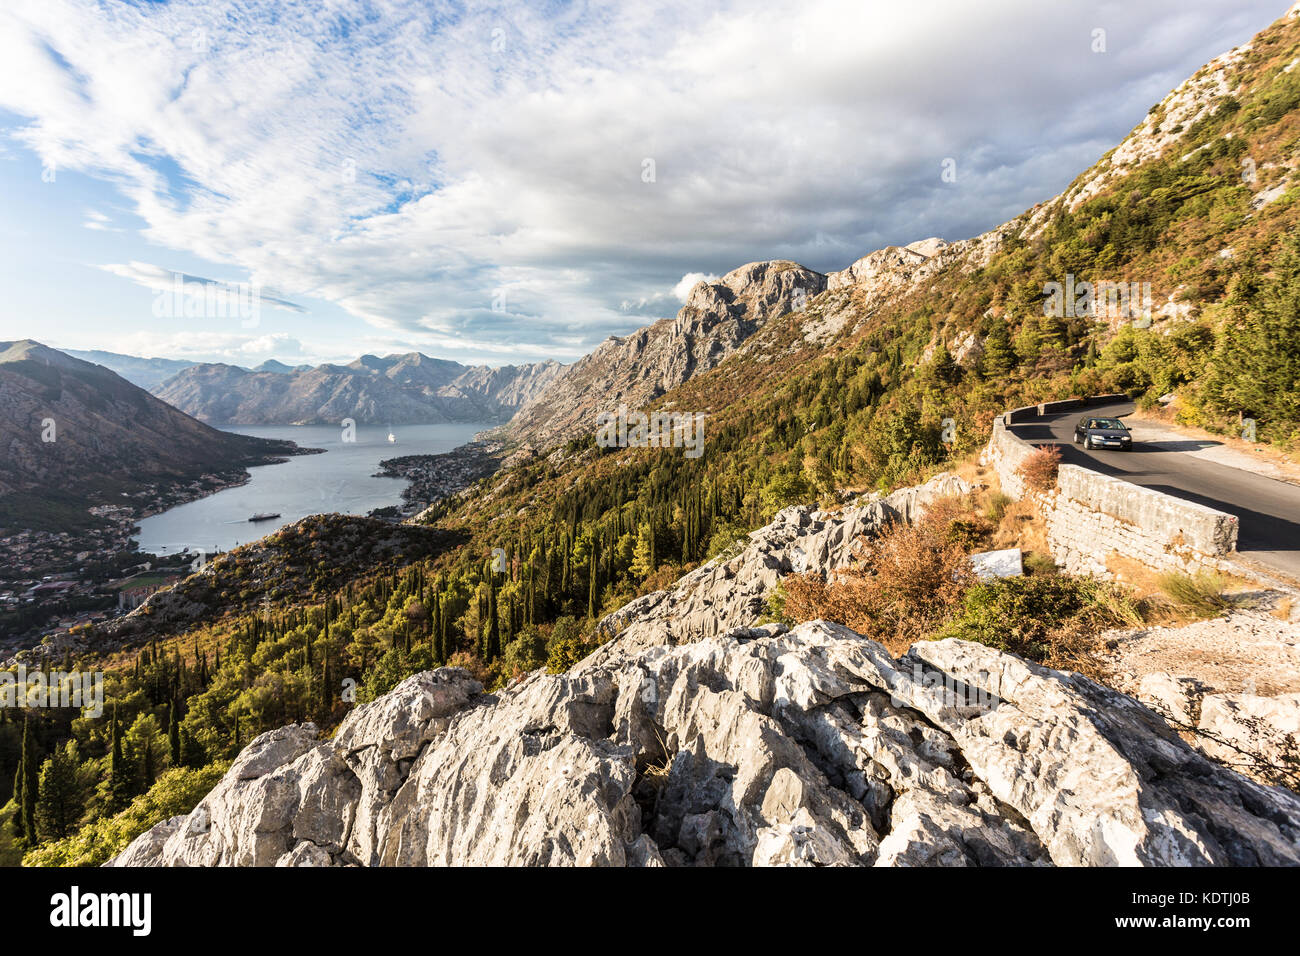 Mountain road above the Kotor bay and old town in Montenegro in the Balkans, Southeastern Europe Stock Photo